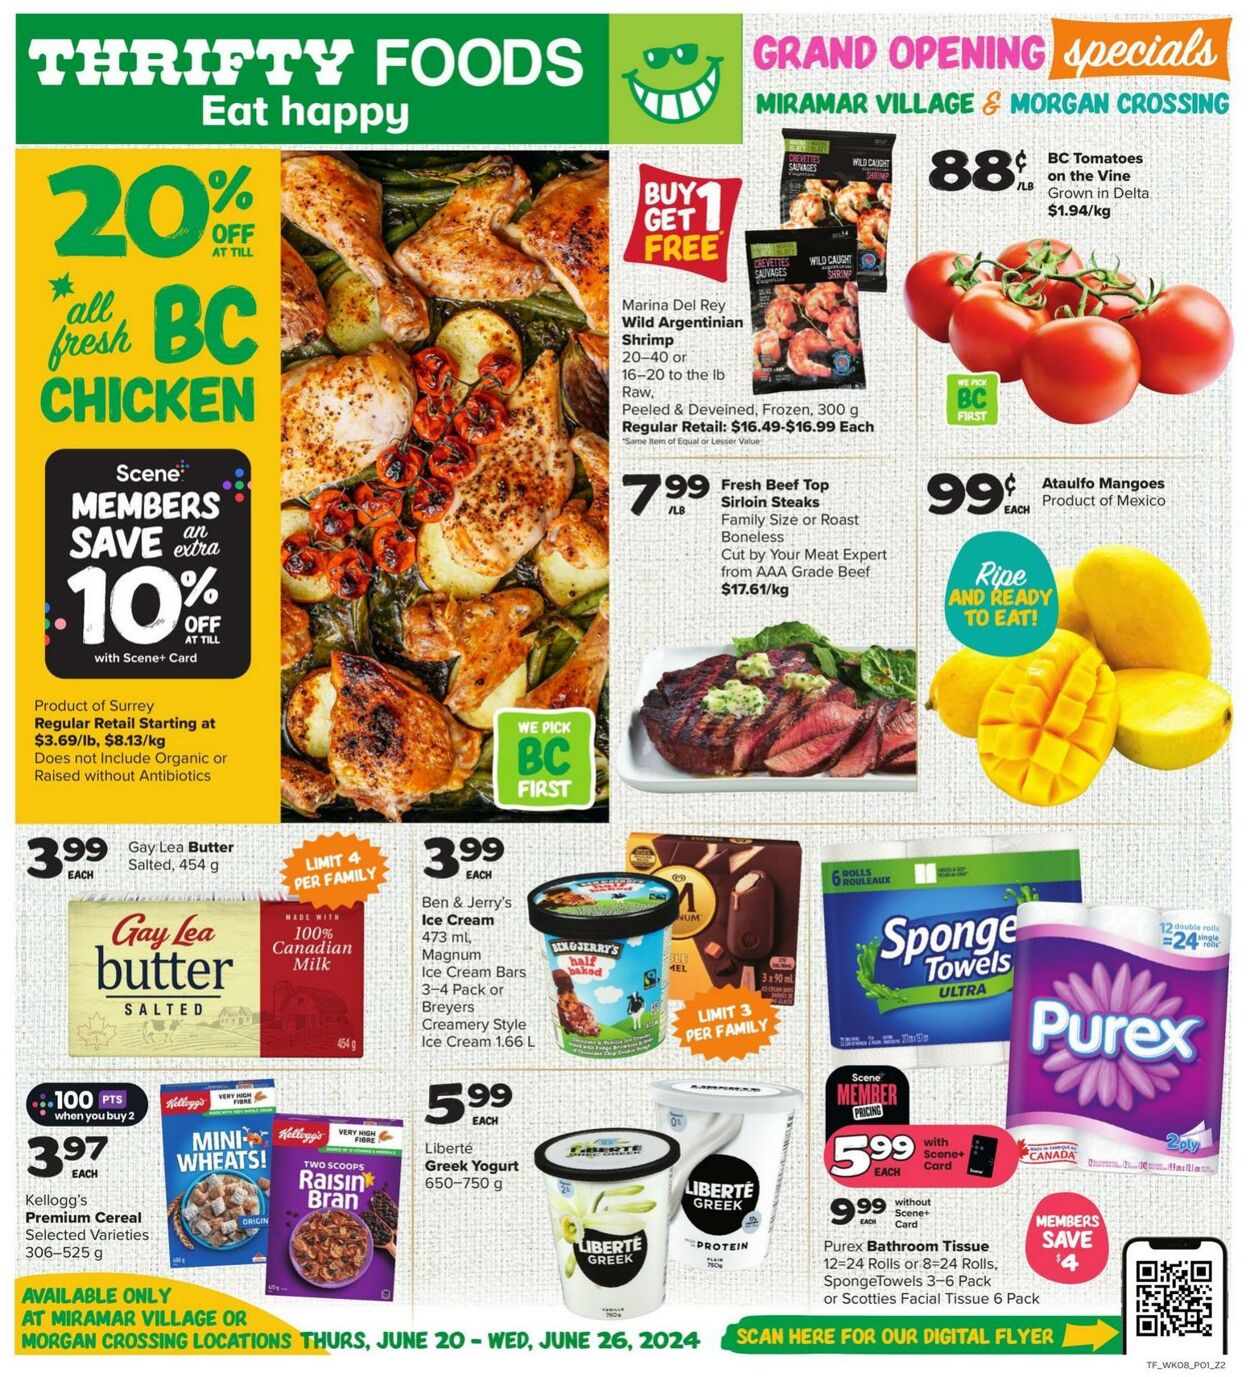 Thrifty Foods Promotional flyers